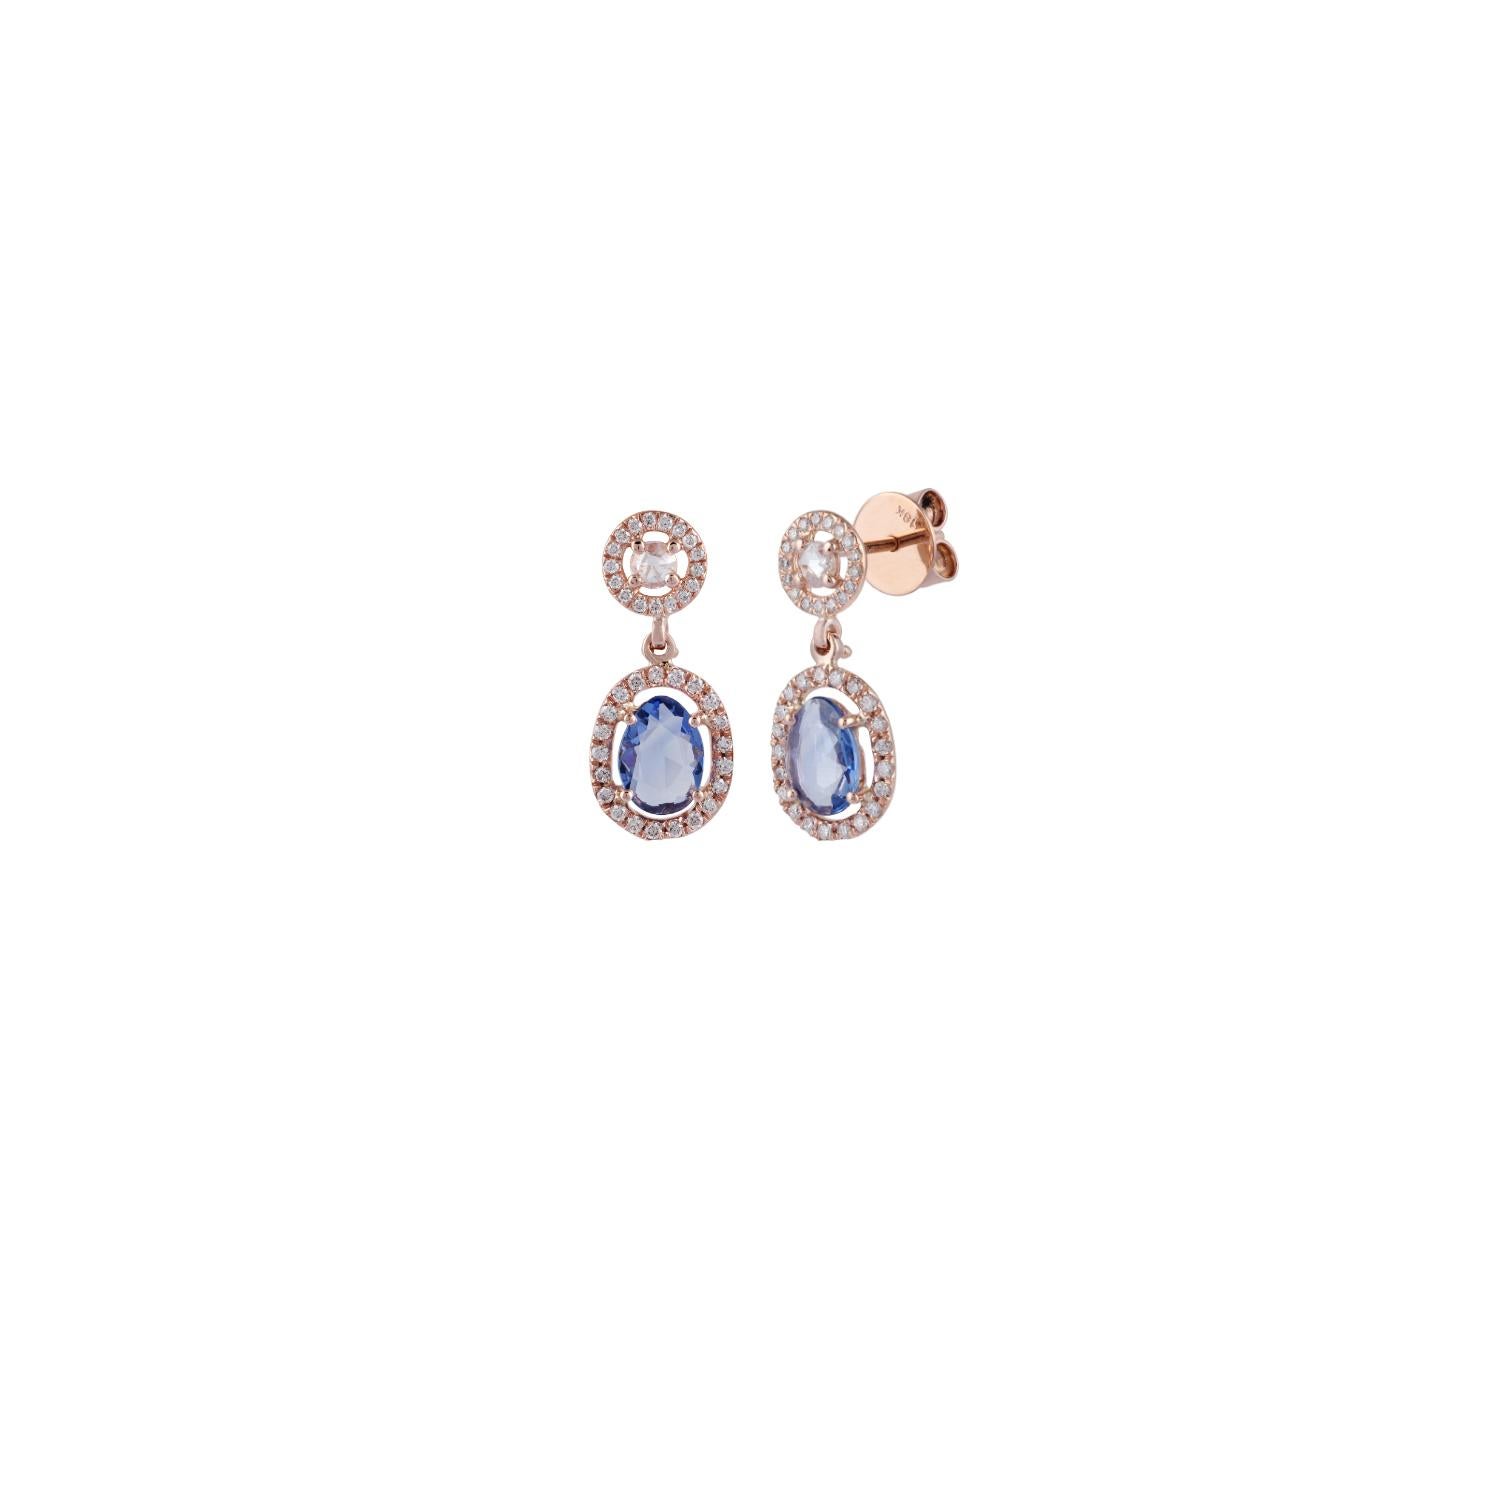 An exclusive pair of earrings with rose cut blue sapphire 2.03 carat, rose-cut diamond 0.10 carat & in the cluster with a round-shaped diamond 0.41 carat studded in 18K rose gold 3.27 grams with a simple pull-push mechanism. These are elegant &